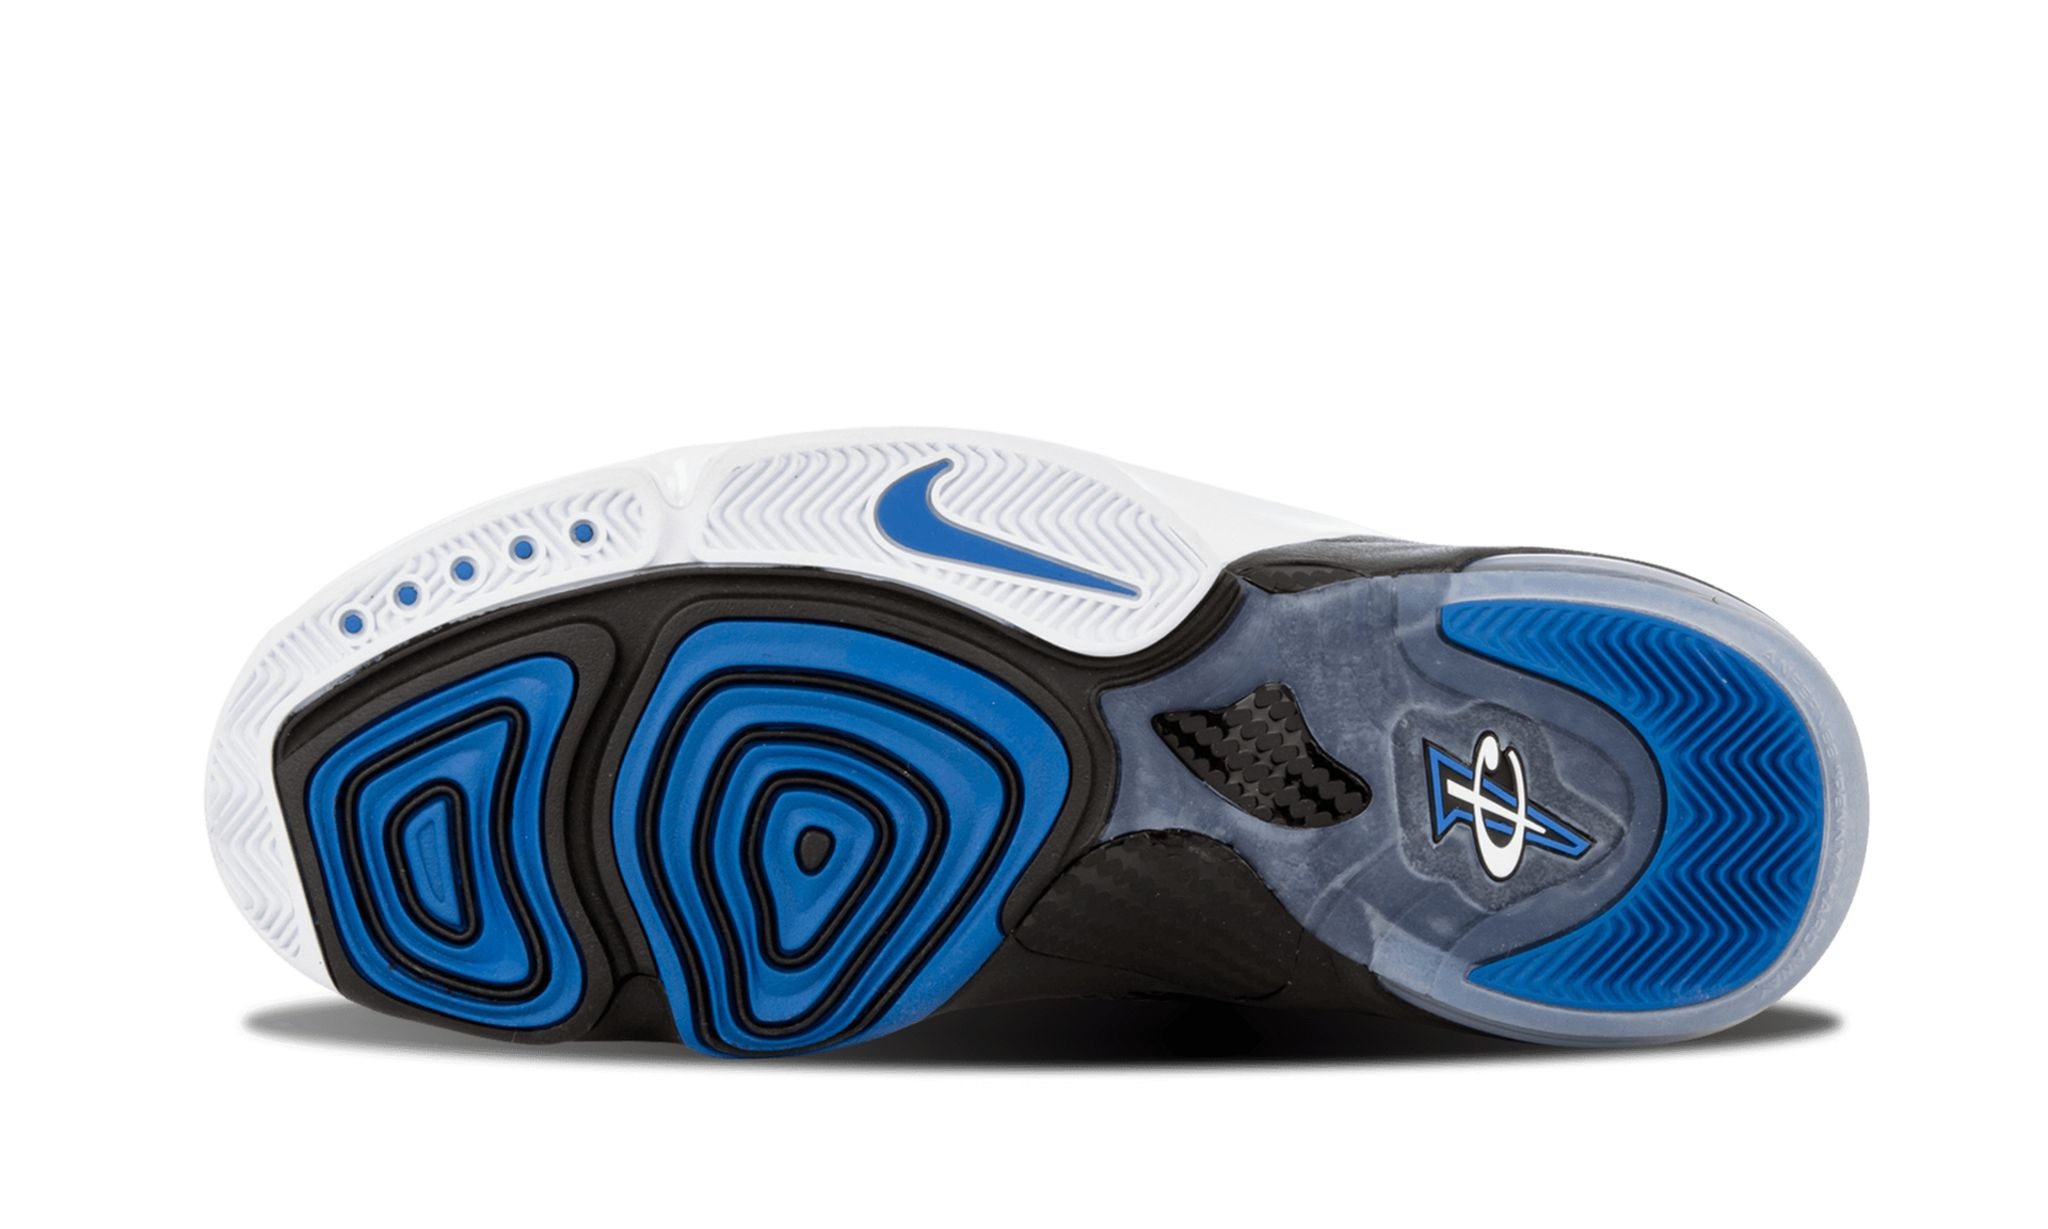 Penny Pack QS "Sharpie Pack" - 7